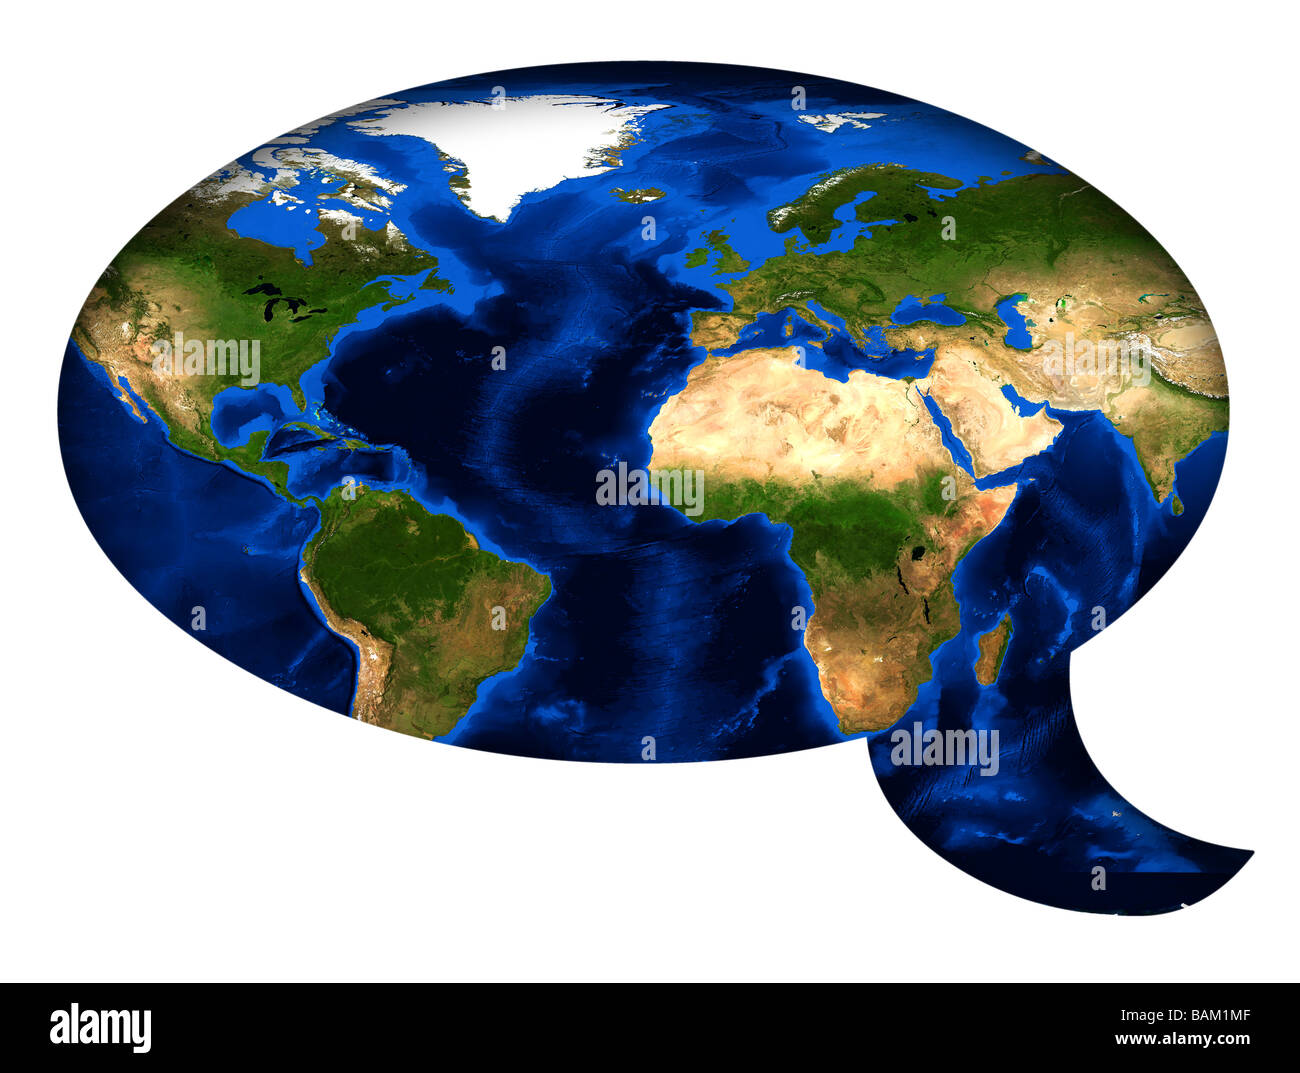 Rendered Earth image (map courtesy of NASA) within speech bubble on white background Stock Photo